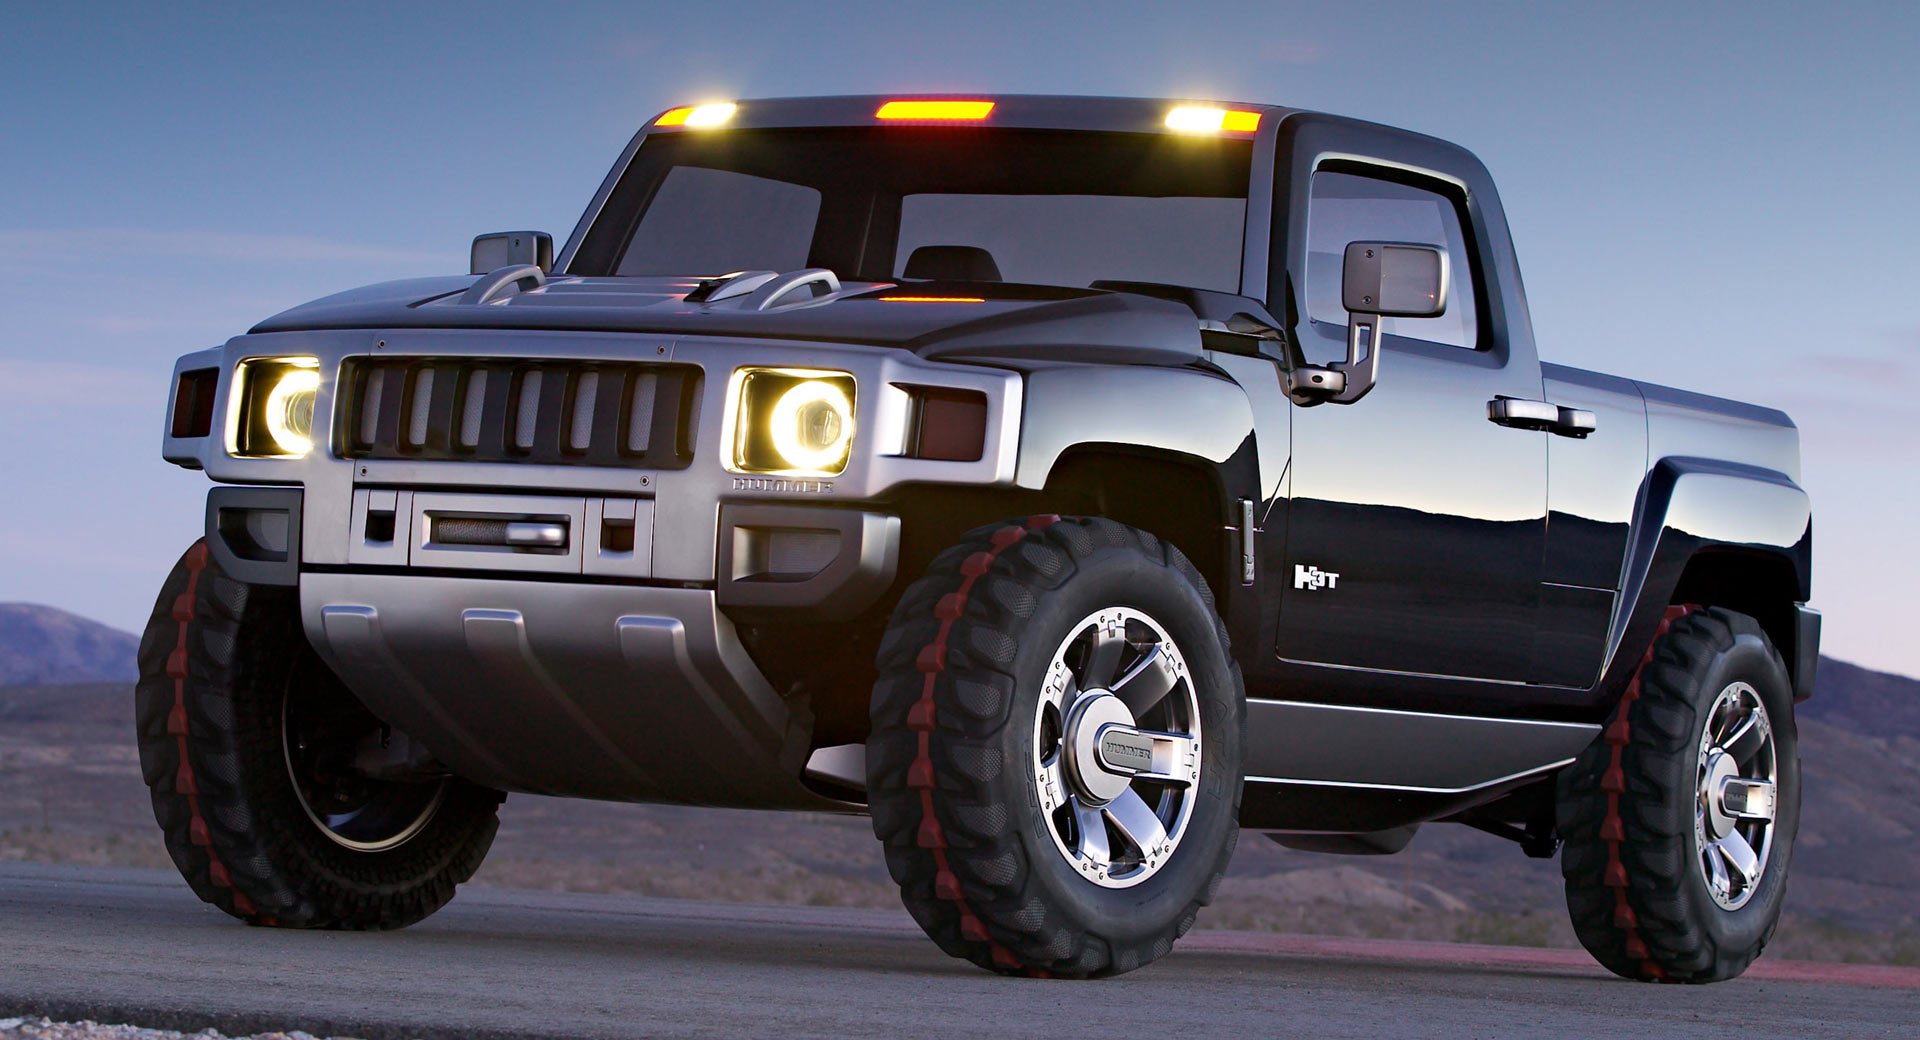 For just $112,595 you can get the new GMC Hummer EV pickup